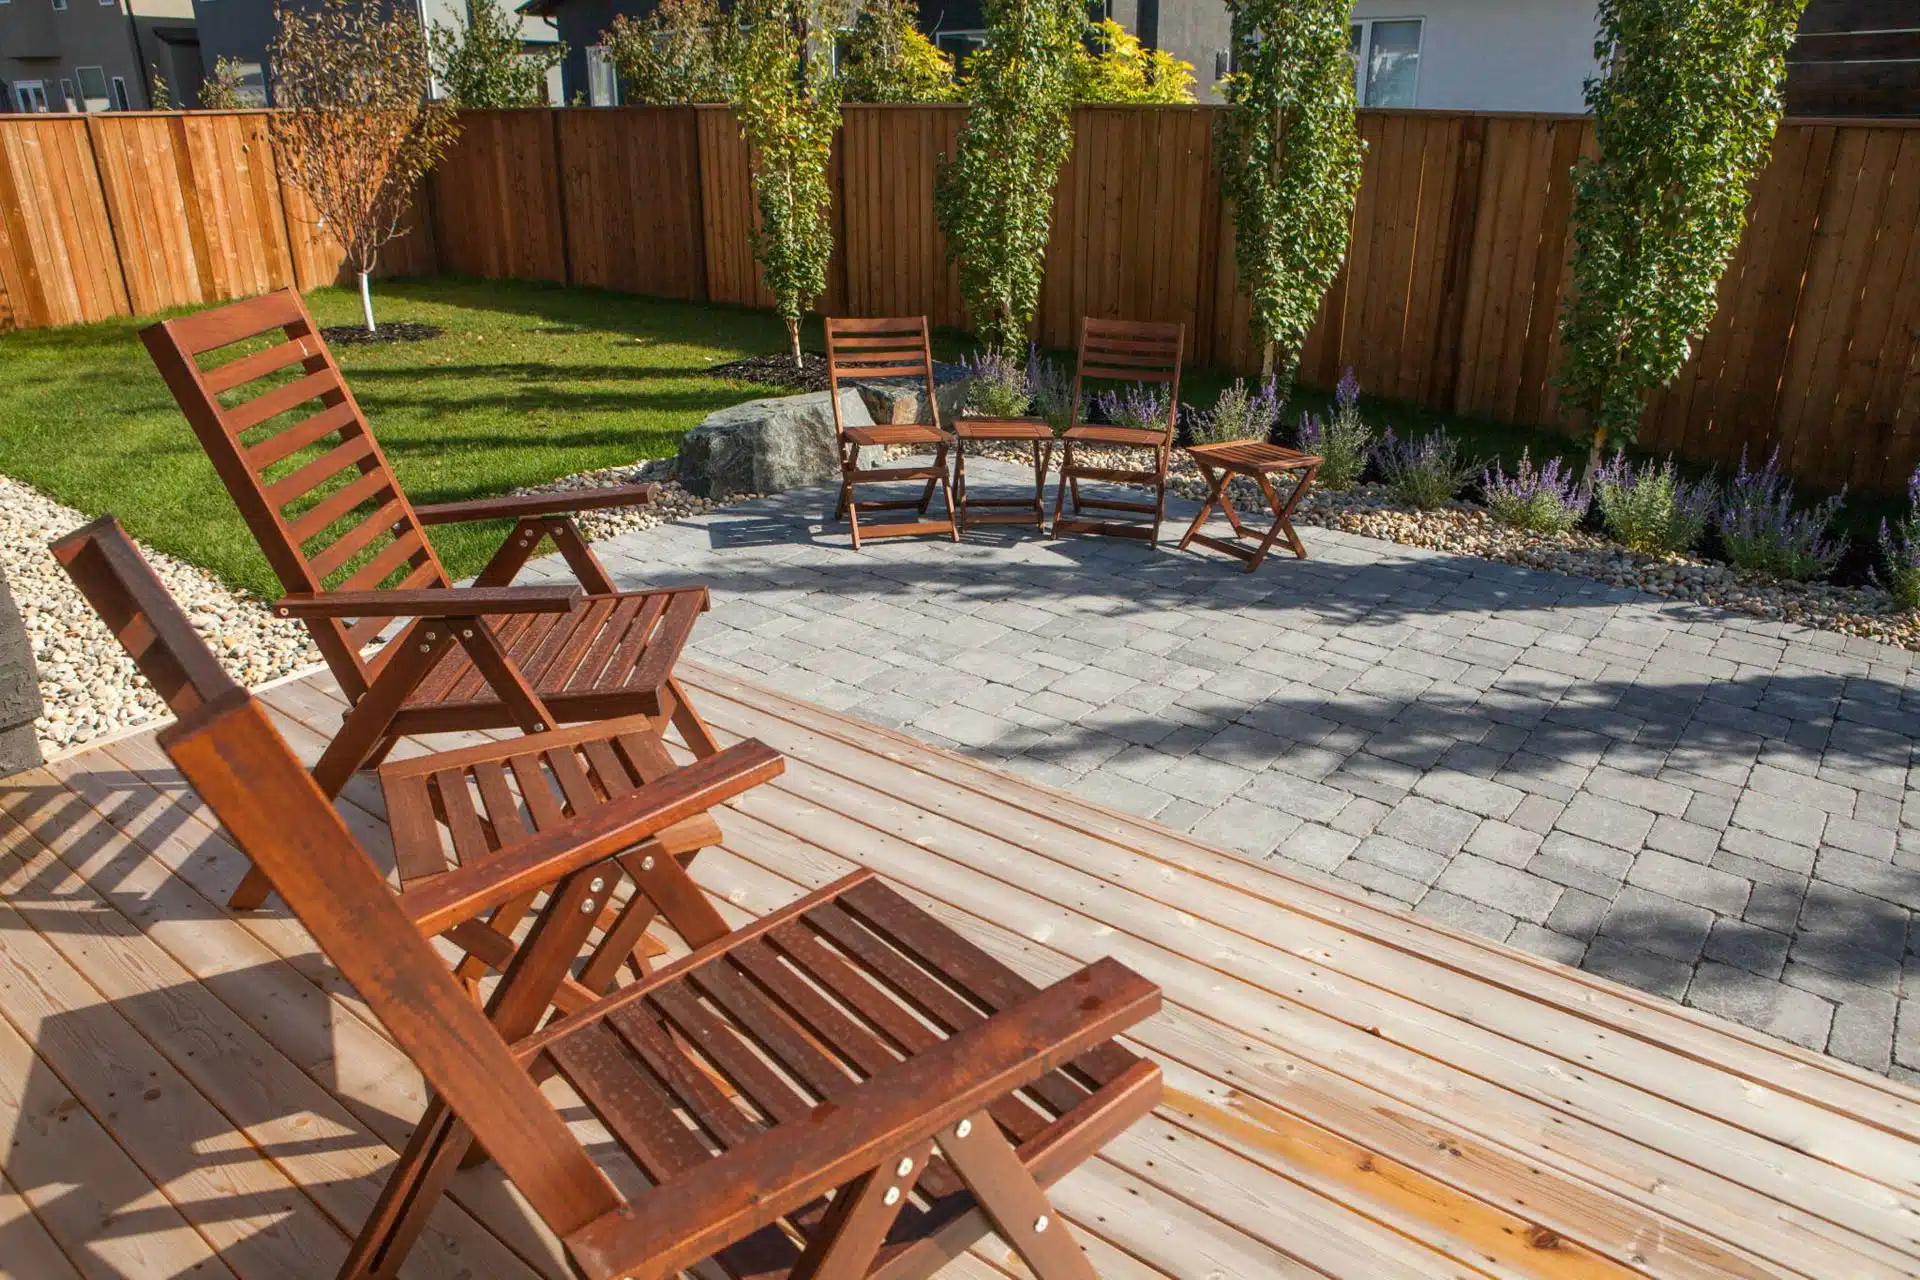 Backyard with wood deck, patio stones, wood chairs, fence, and landscaping
